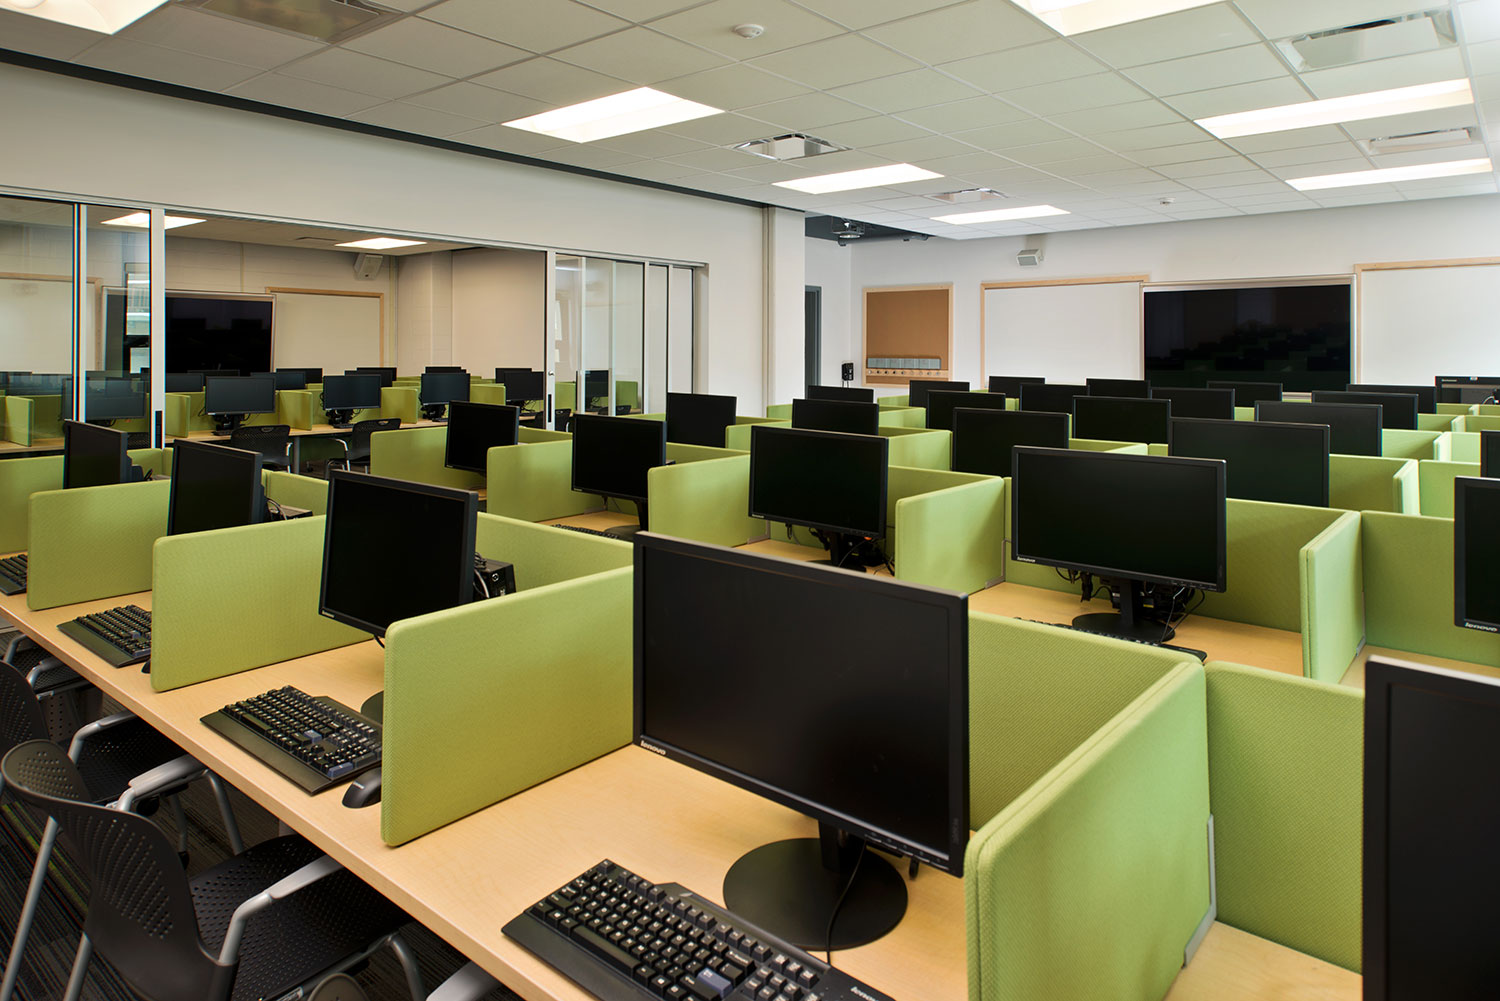 Computer lab in the reconfiguration and reconstruction of 100,000sf of existing space in three buildings at Hudson Valley Community College.